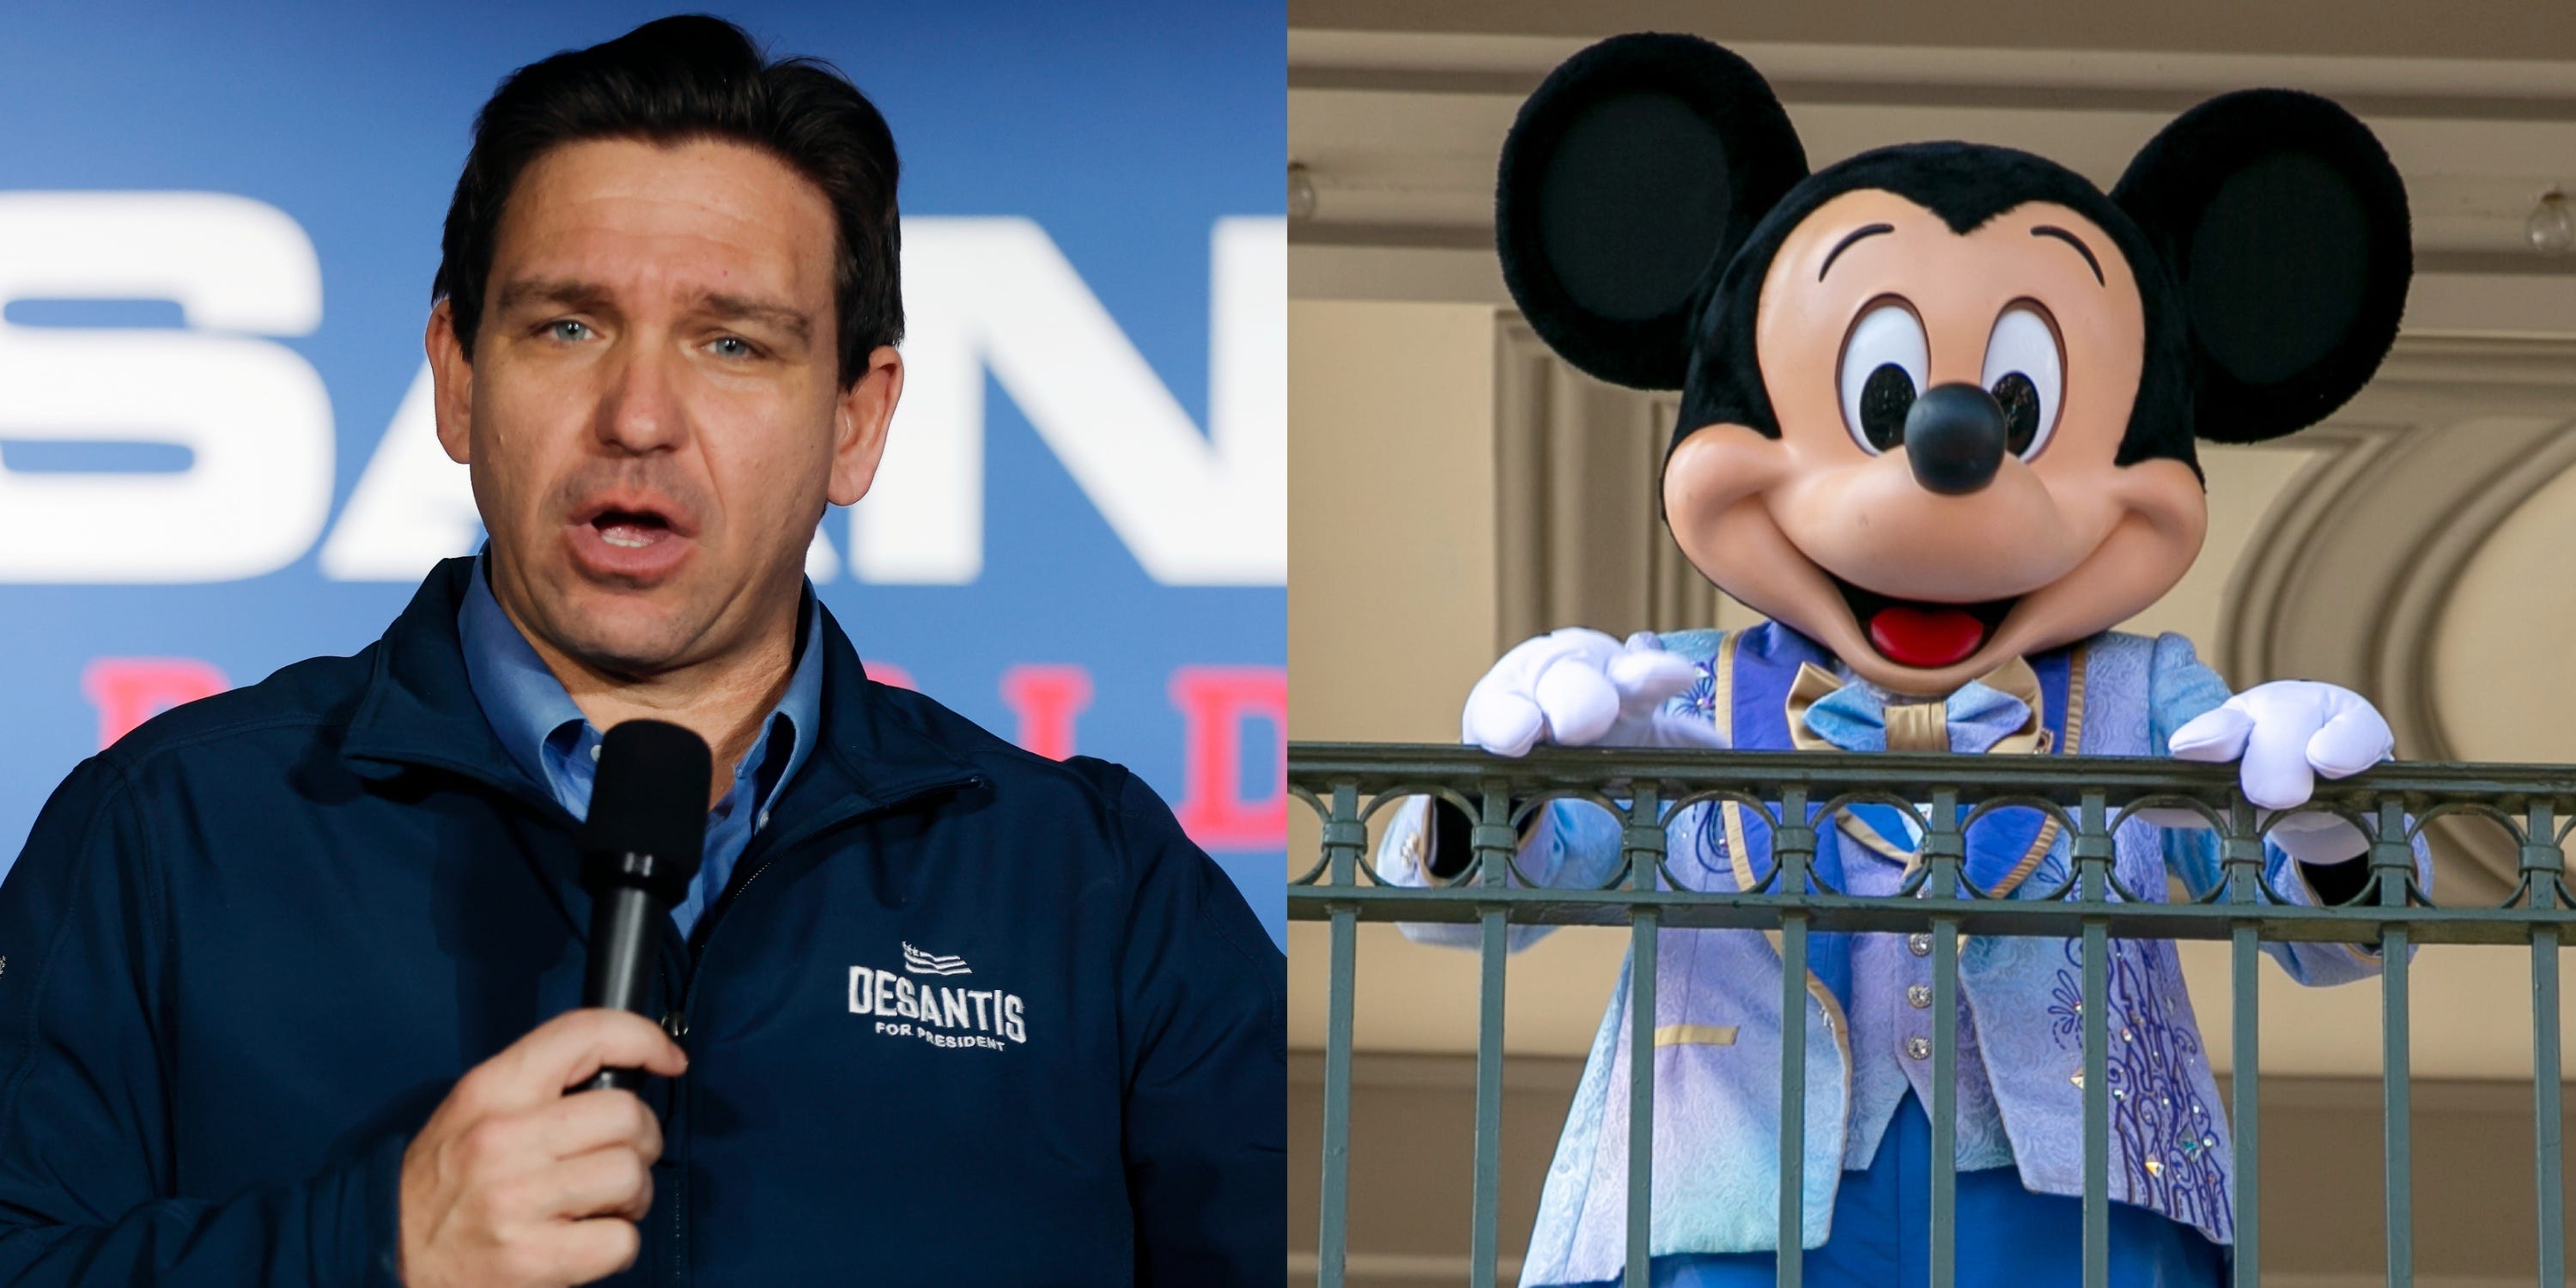 microsoft, the legal war between disney and florida is over